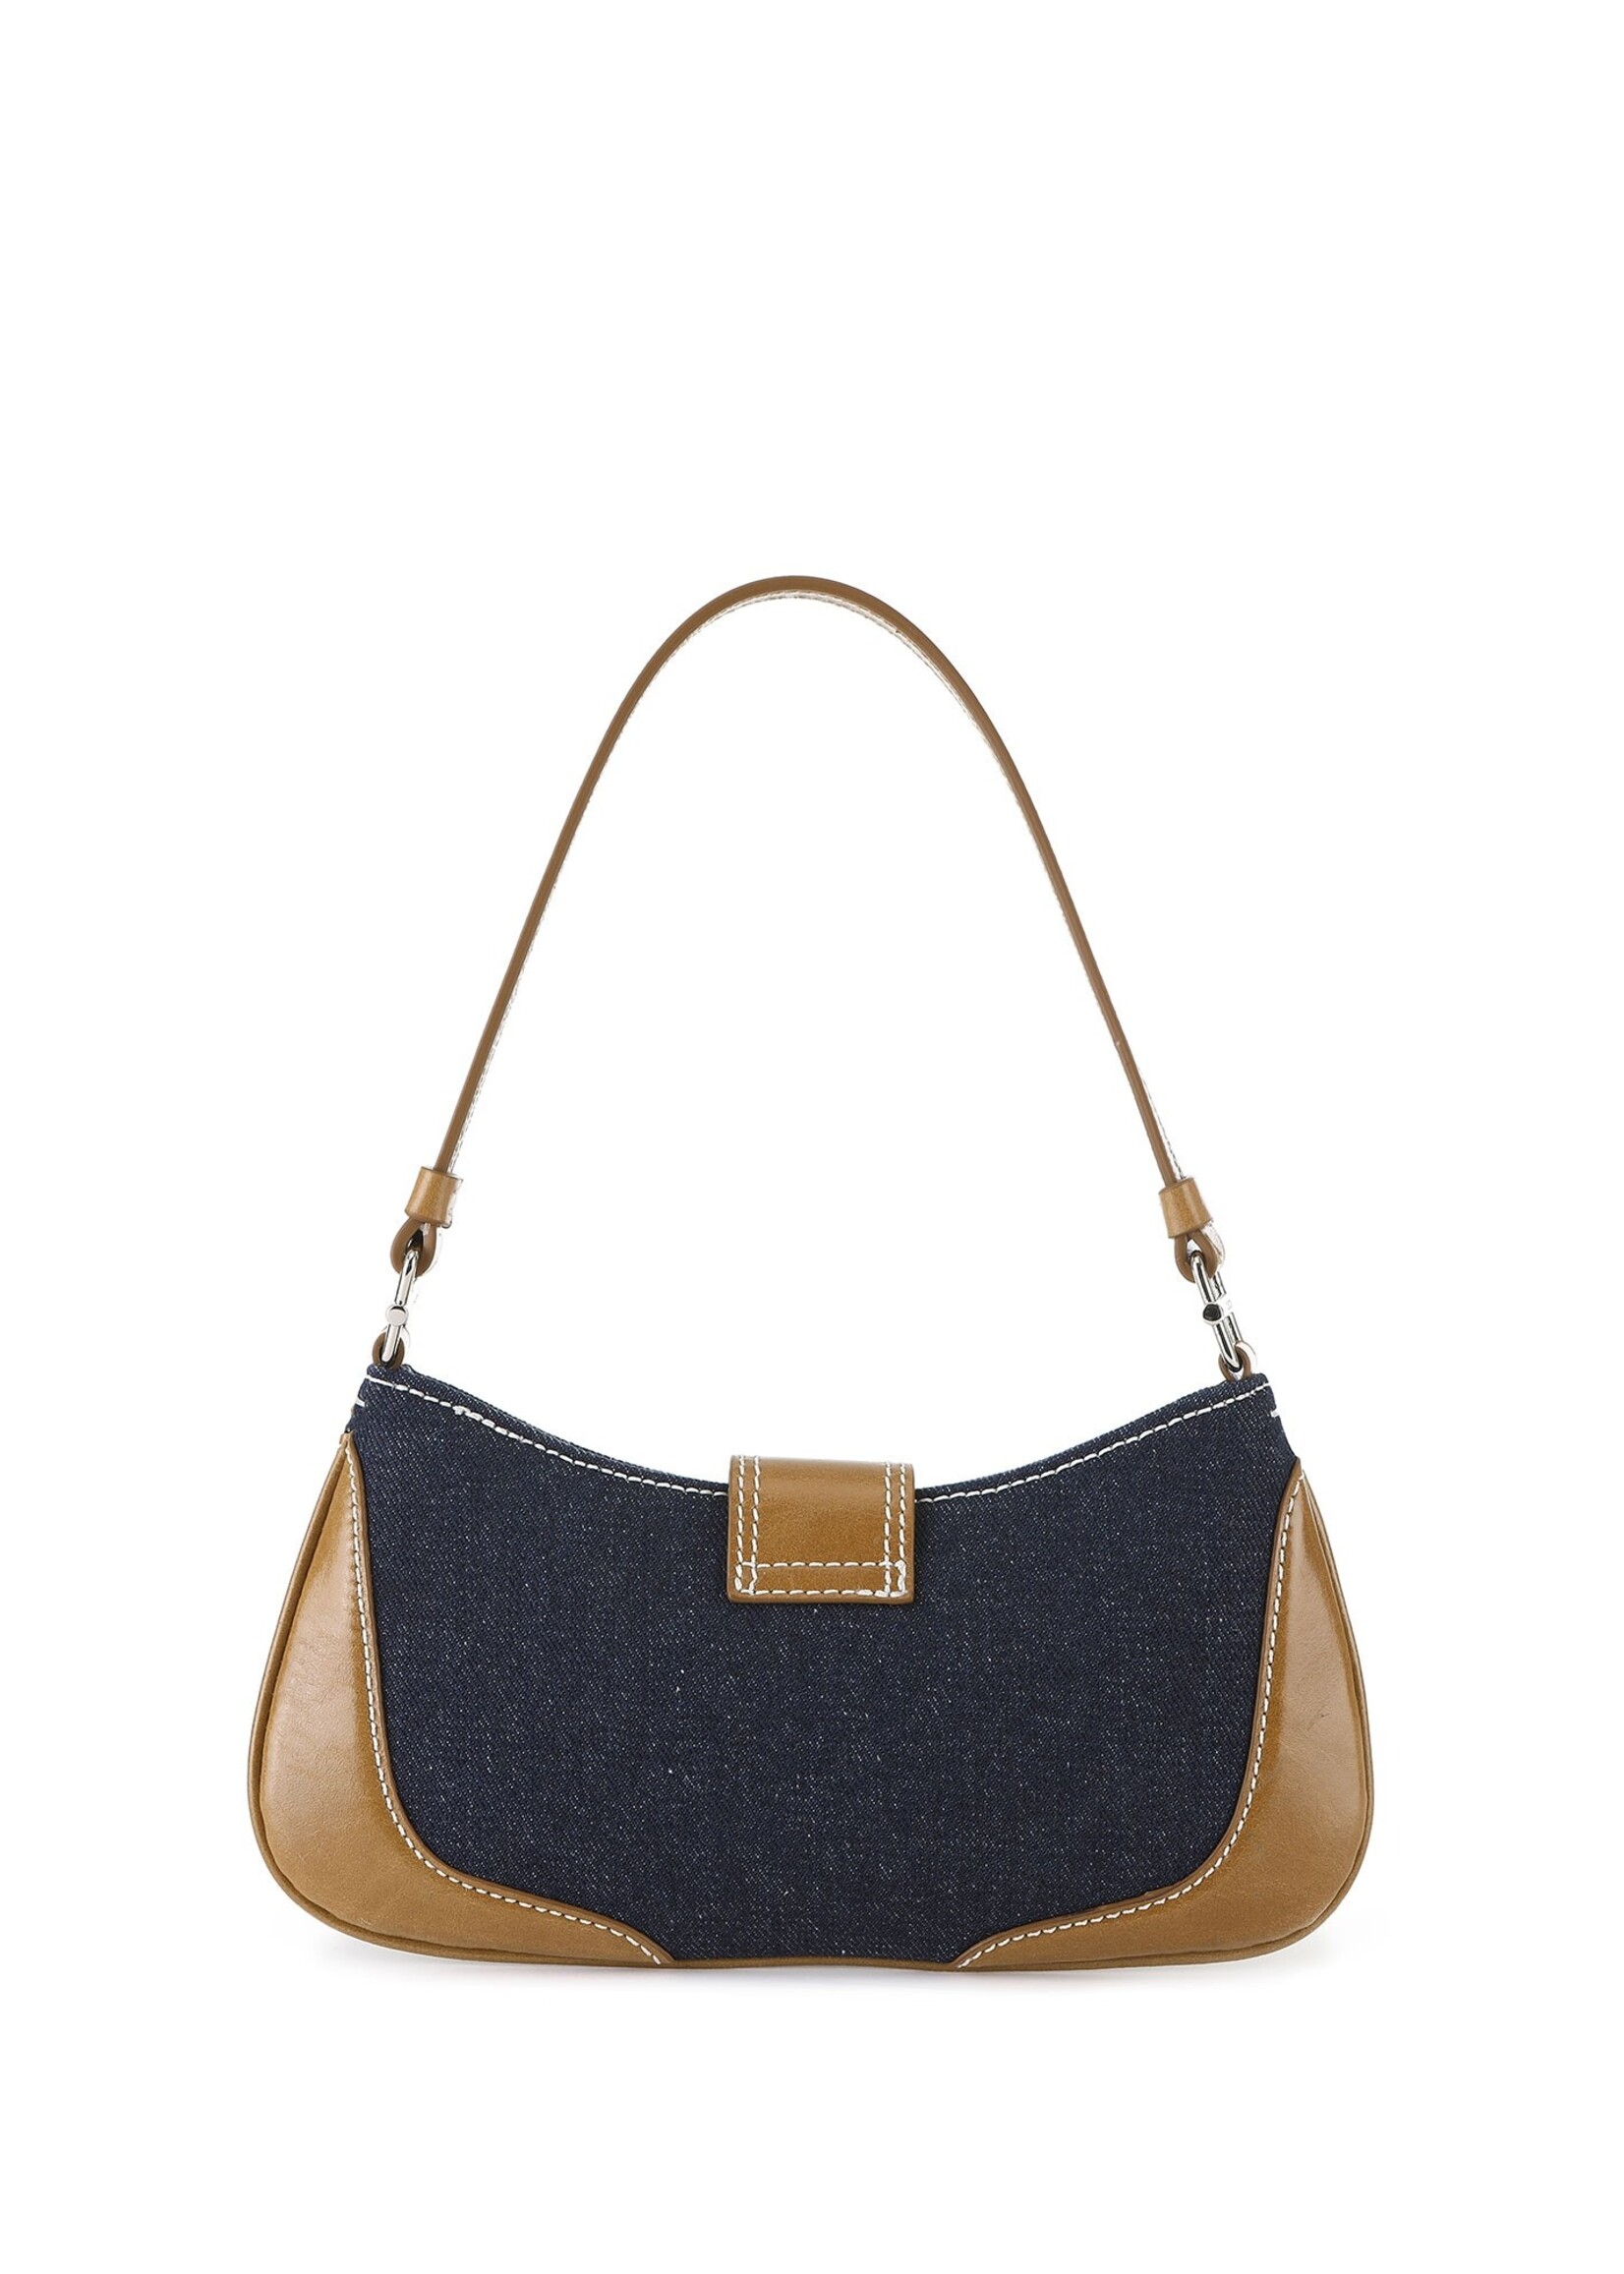 OSOI Small Shoulder Brocle Bag in Denim and Leather